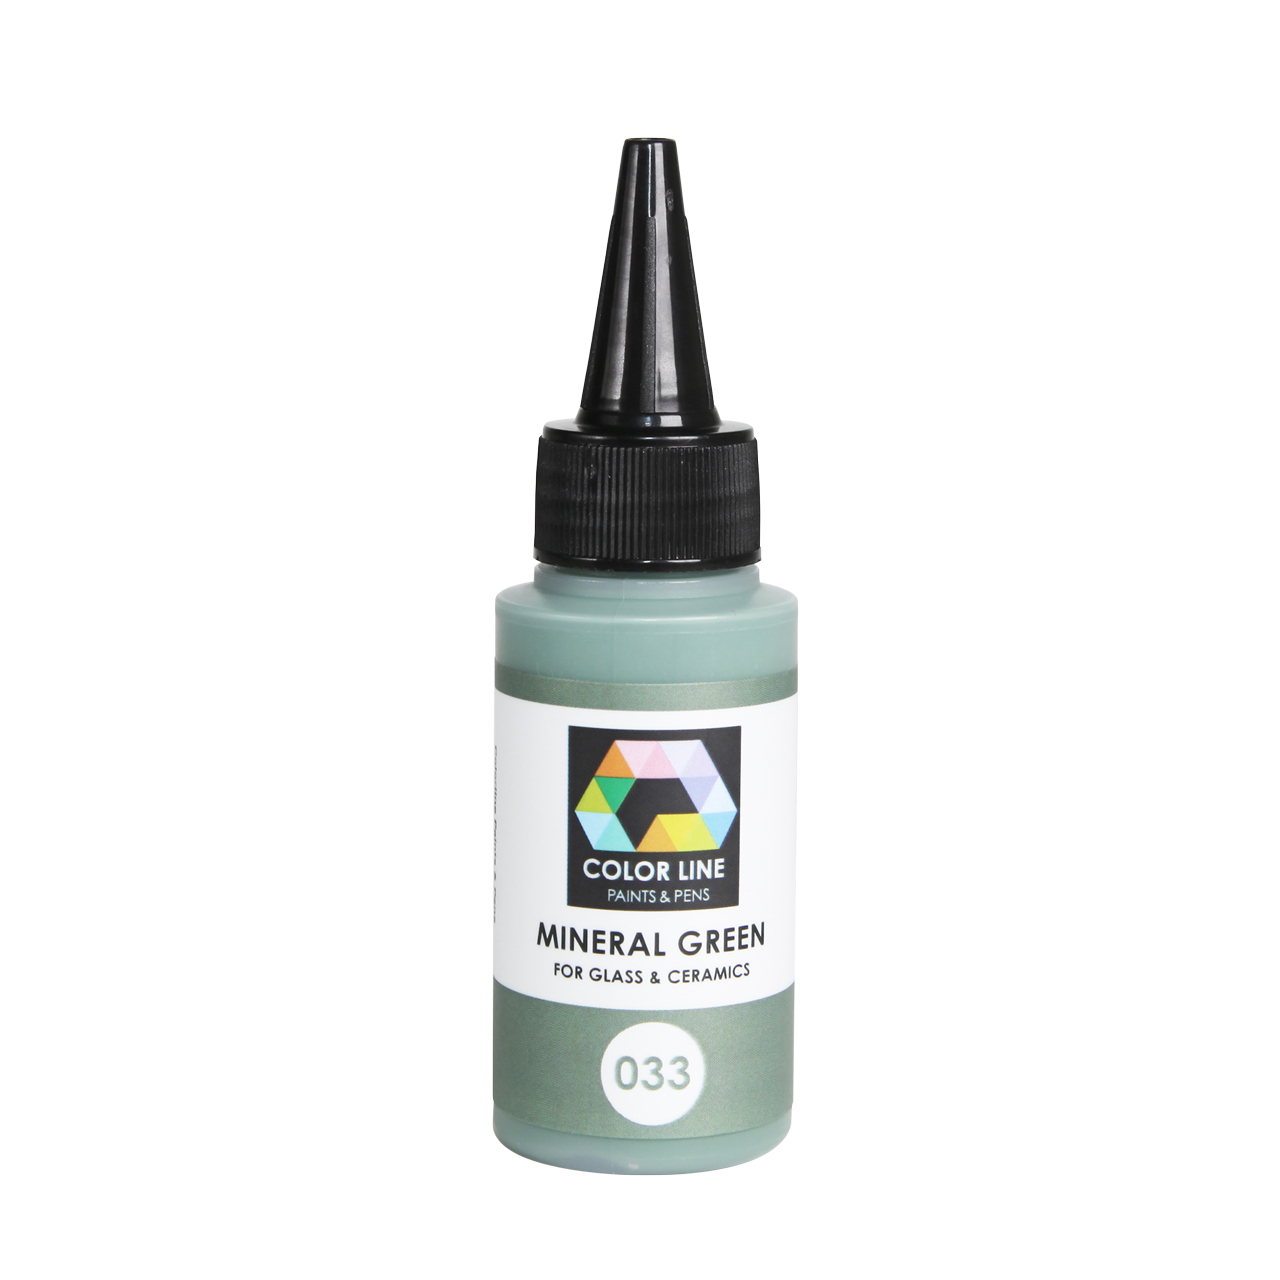 Color Line Paint 033 mineral green 62g